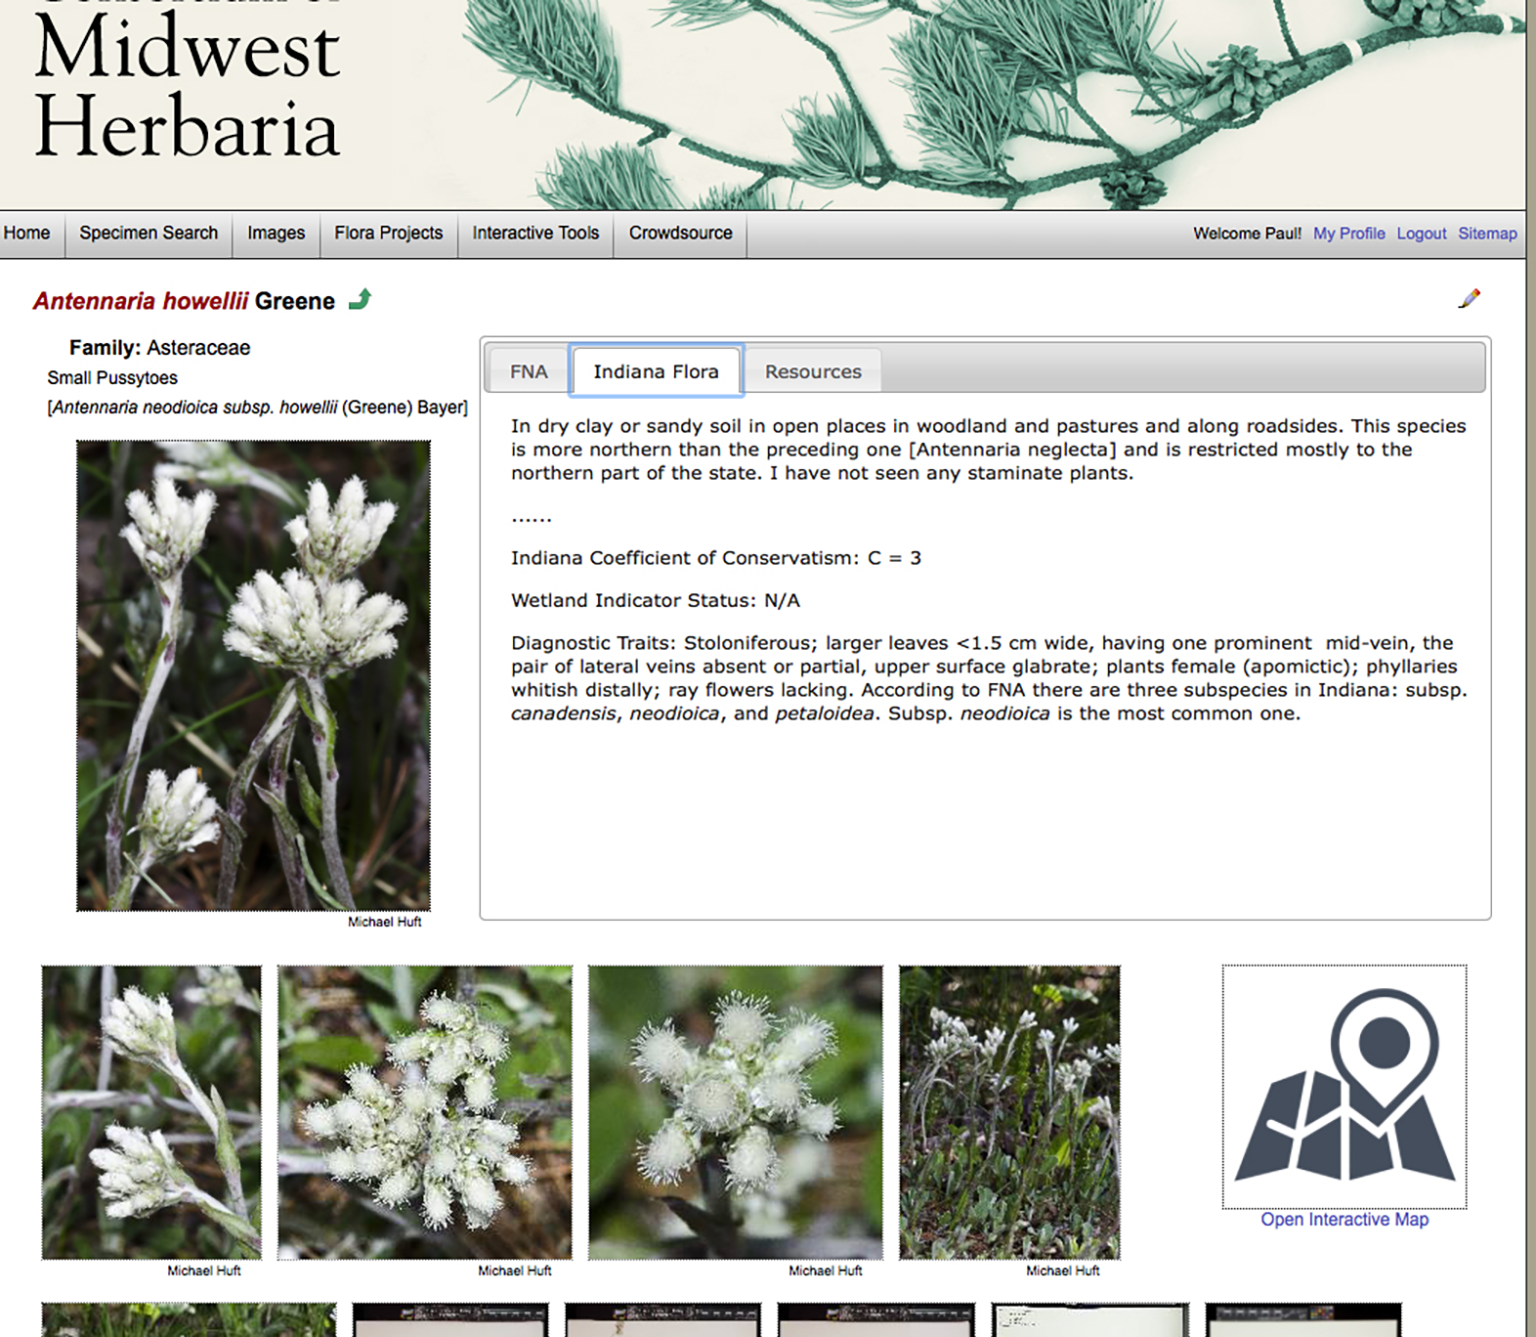 This example of a species page  from the Consortium of Midwest Herbaria website includes photos, verbal descriptions of the species, and habitat as well as a link to a map showing where the species is known to occur.